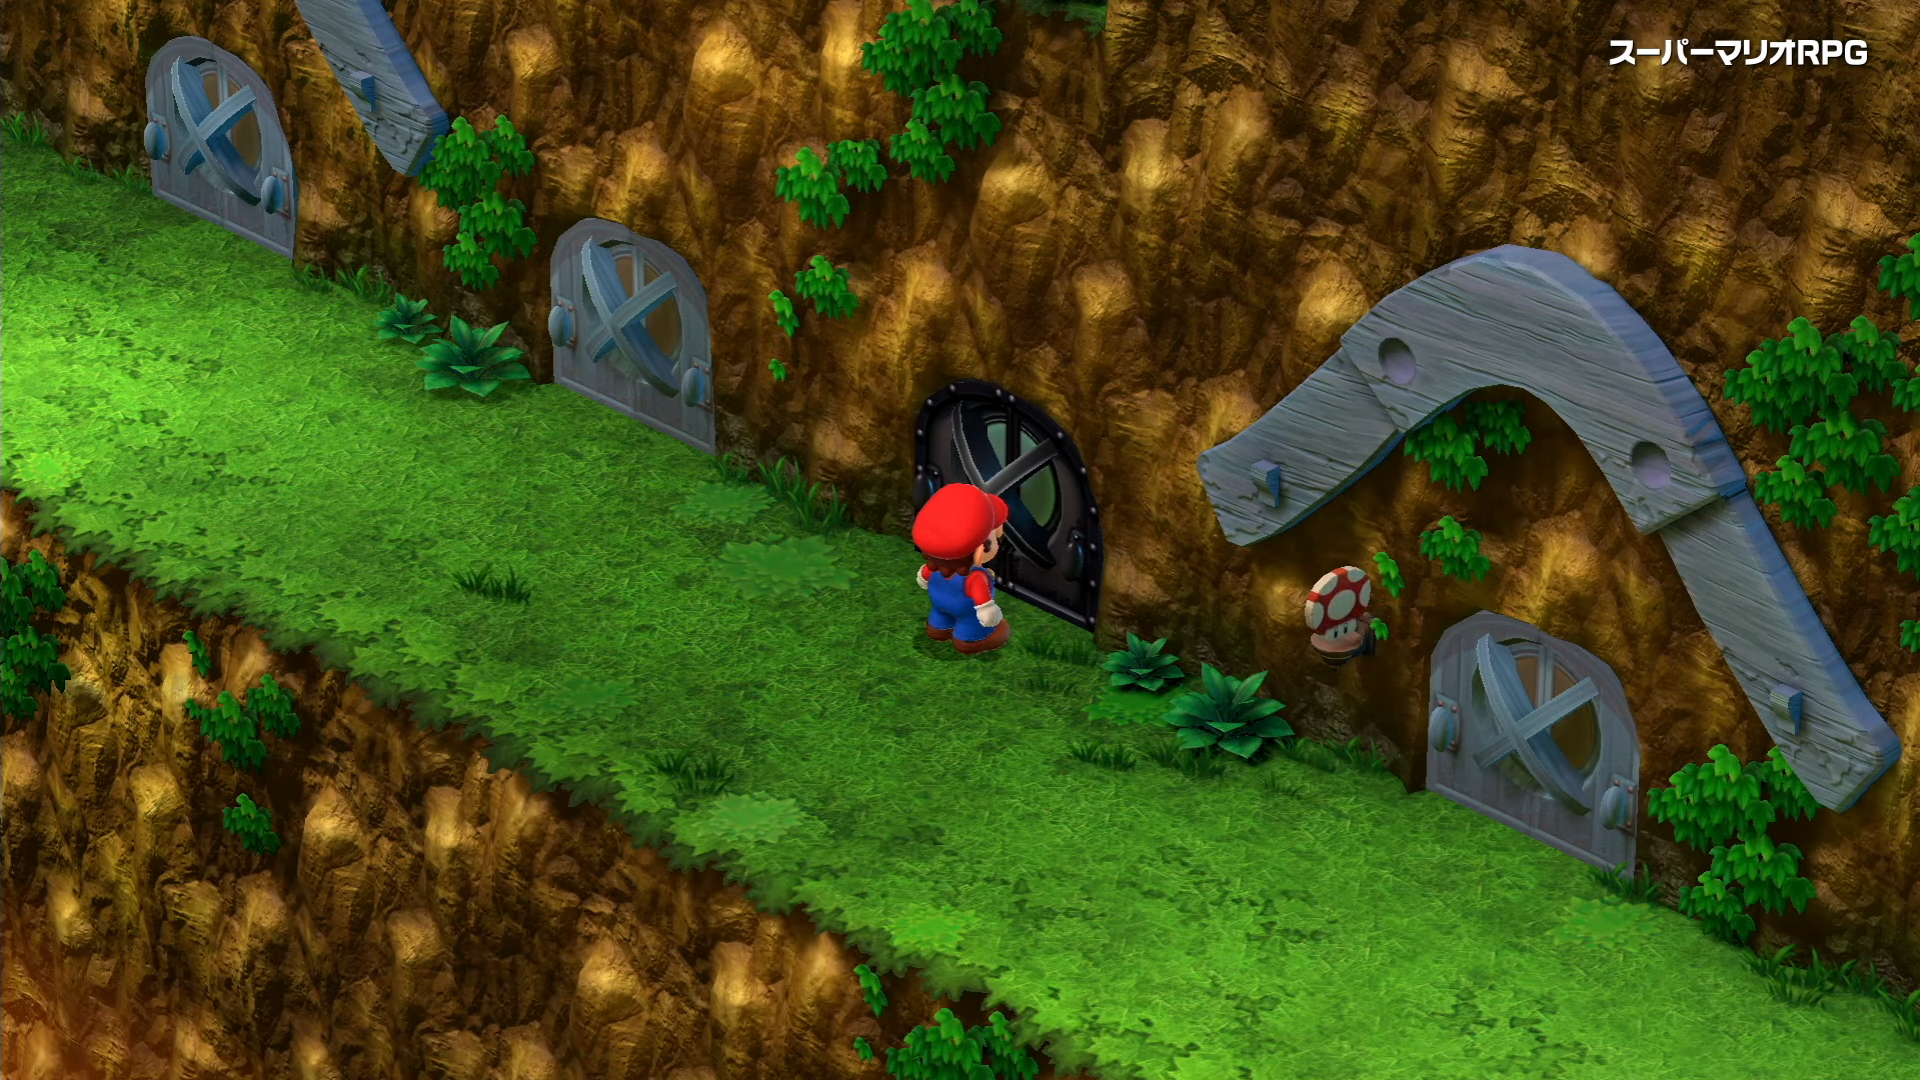 A 'Super Mario RPG' remake is coming to Nintendo Switch on November 17th